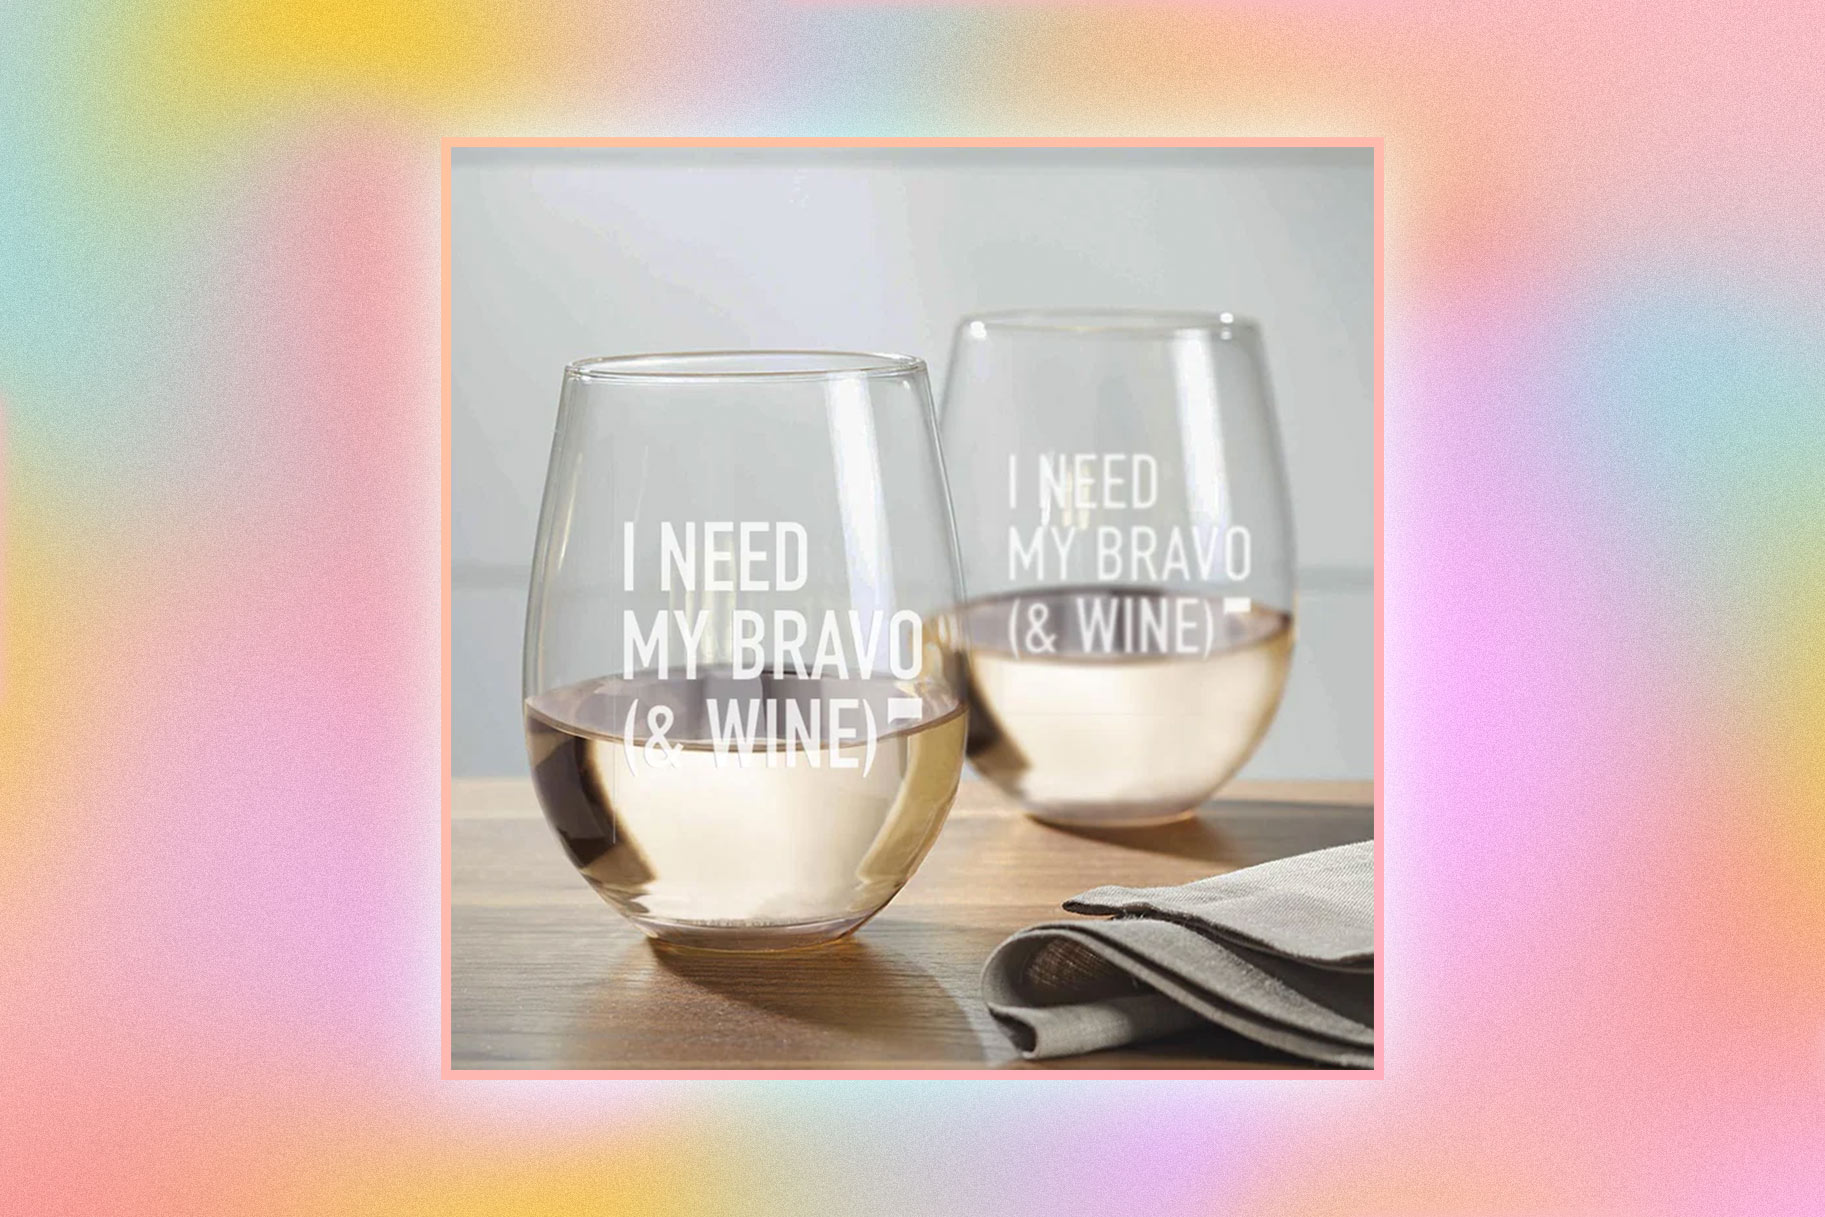 Wine glasses with a quote printed onto them overlaid onto a colorful background.